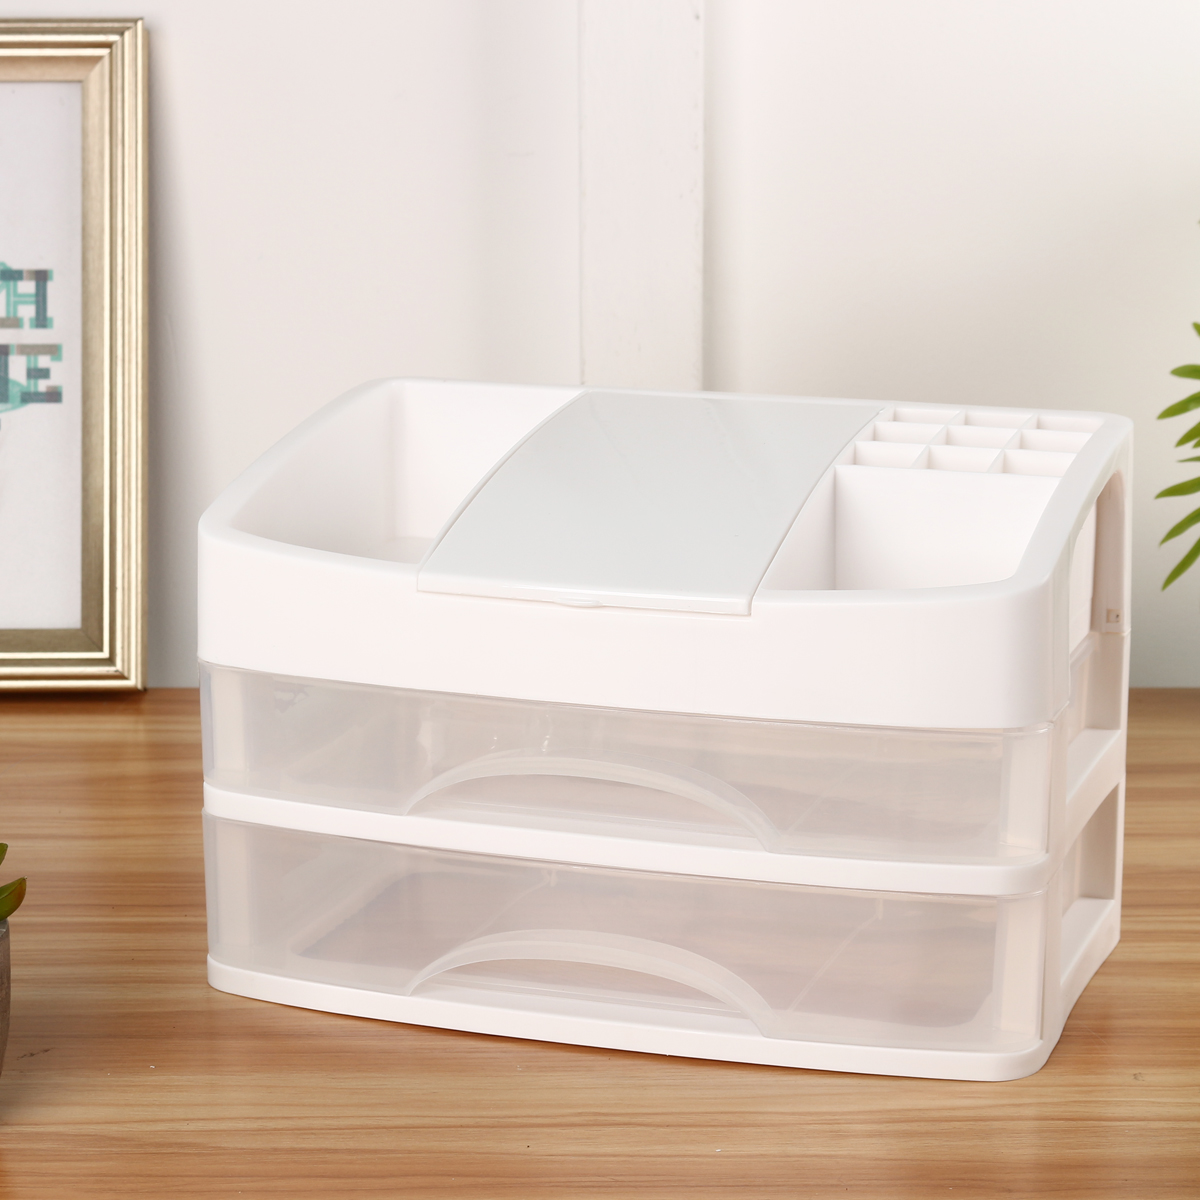 23-Layers-Clear-Drawers-Makeup-Case-Cosmetic-Organizer-Storage-Jewelry-Box-Holder-1490773-6